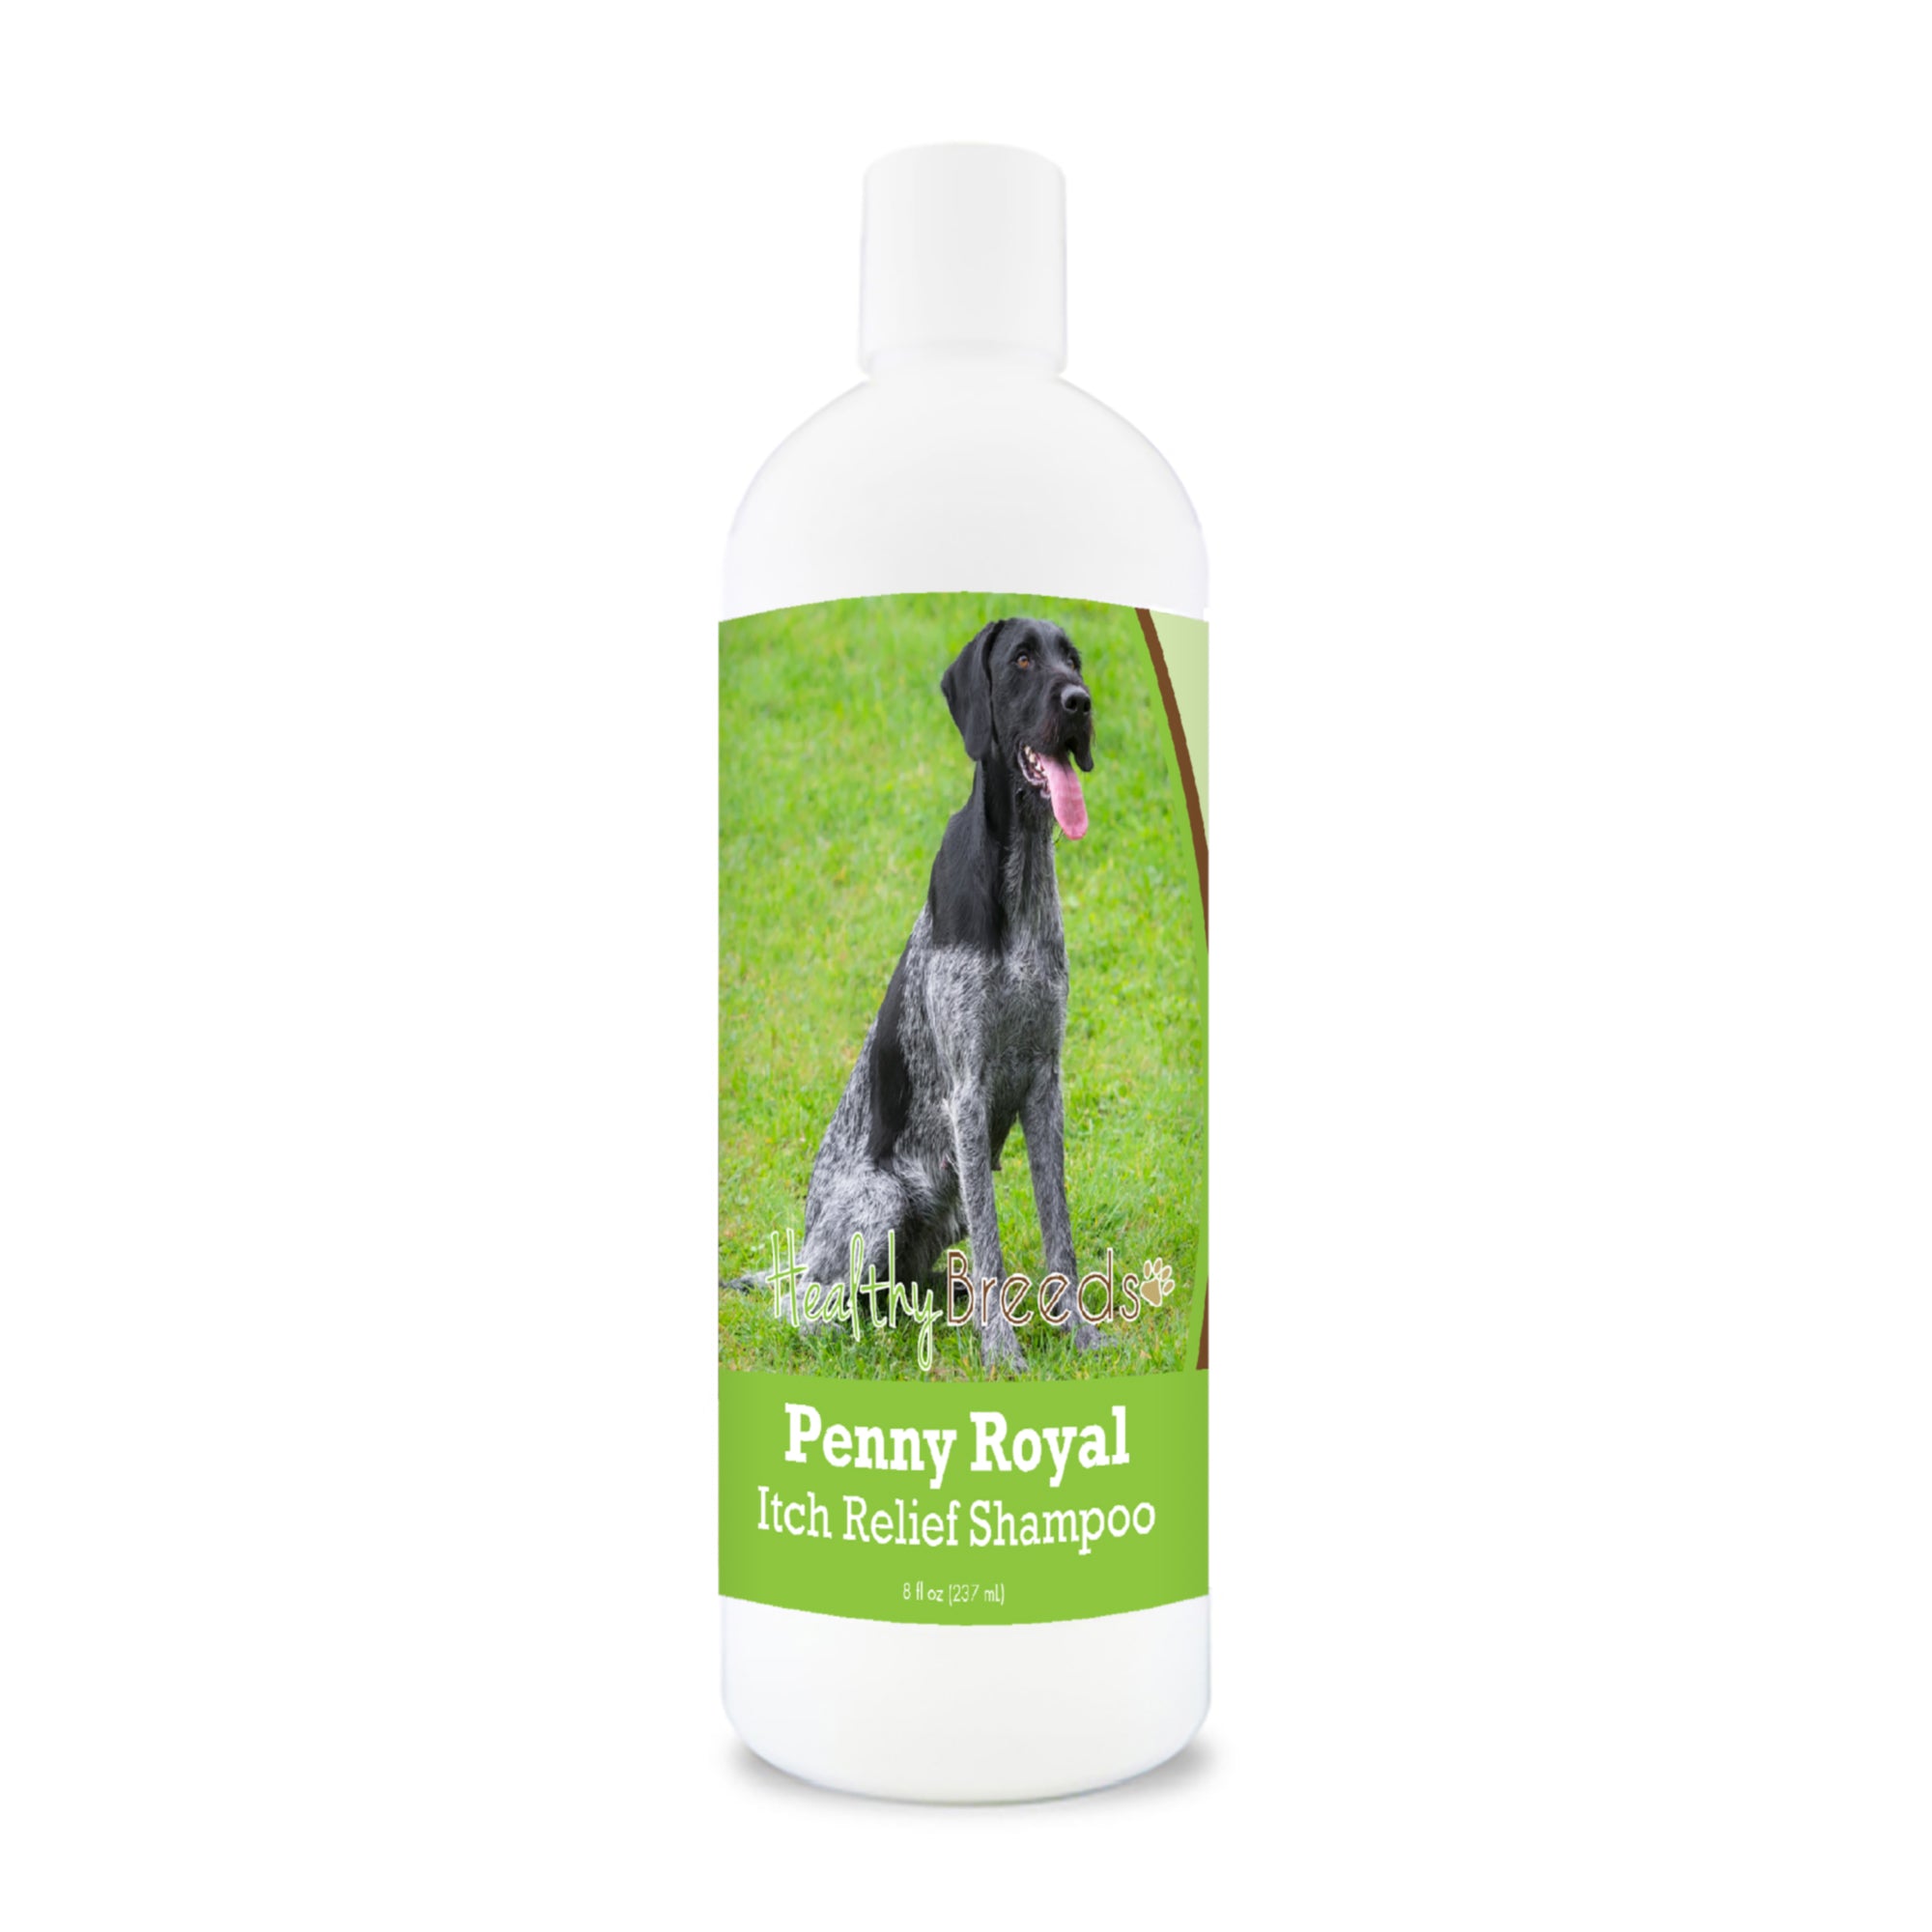 German Wirehaired Pointer Penny Royal Itch Relief Shampoo 8 oz